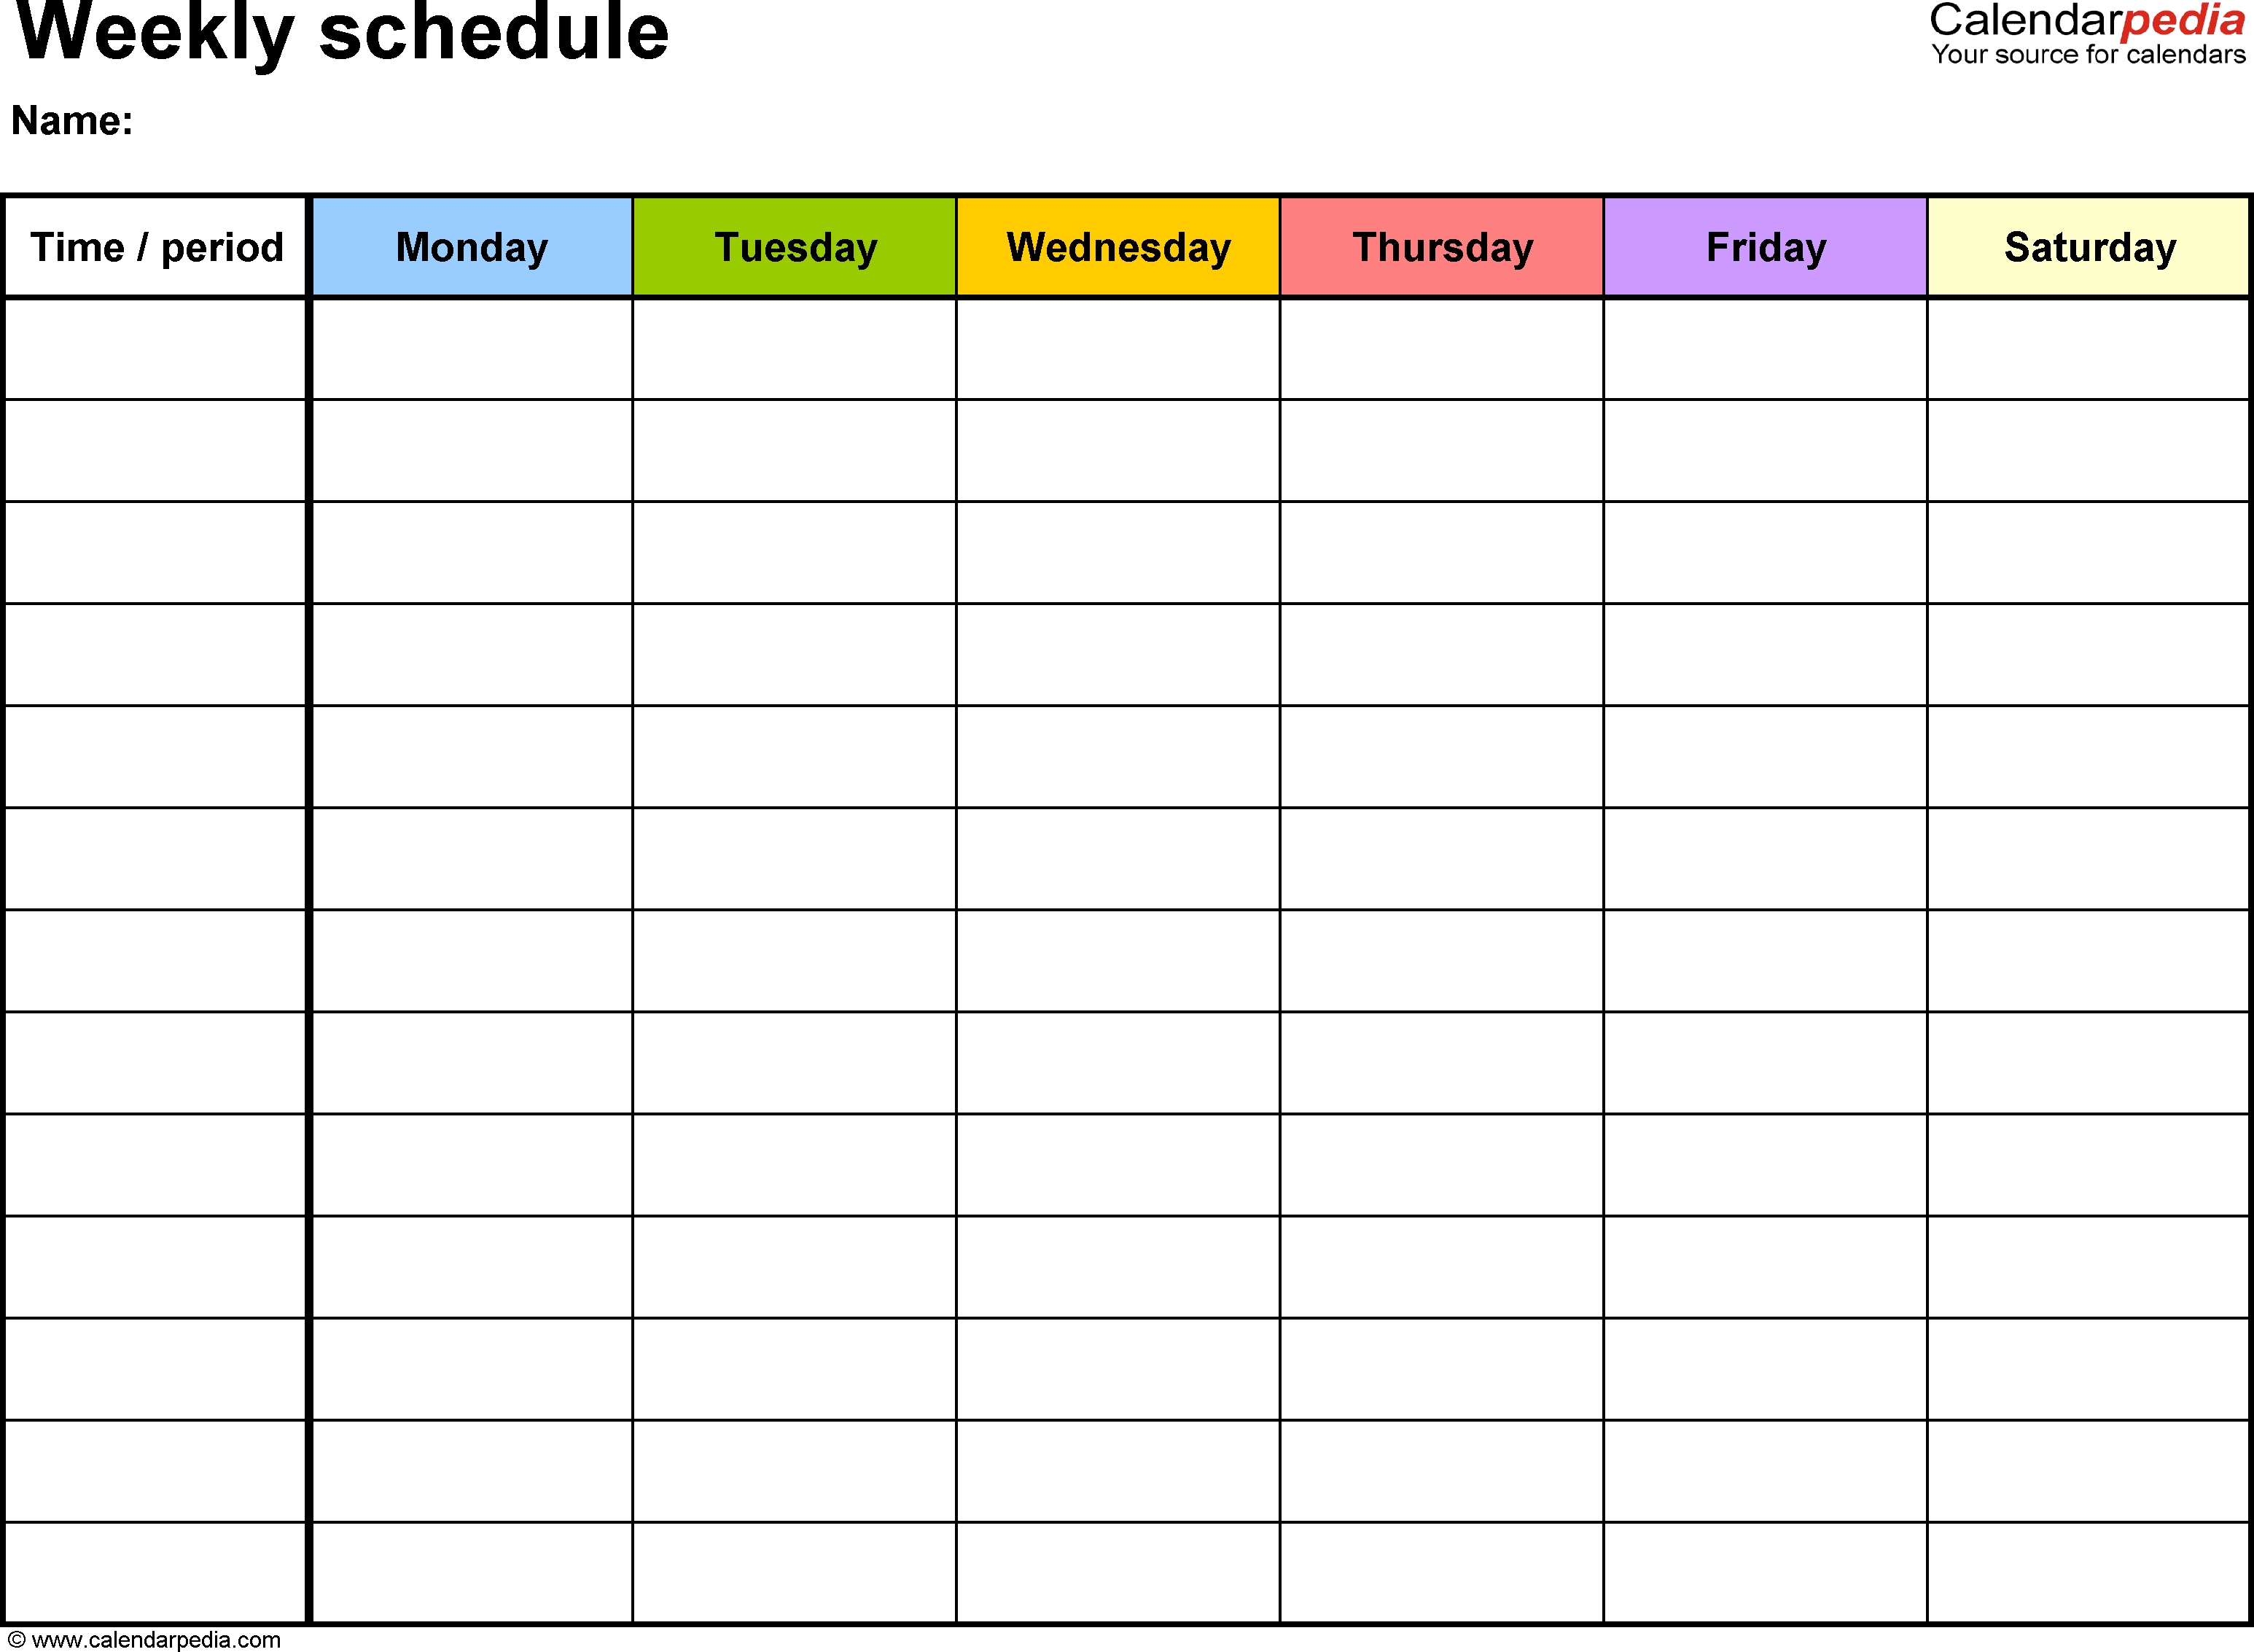 Free Weekly Schedule Templates For Word - 18 Templates within 5 Day Calendar Microsoft Word